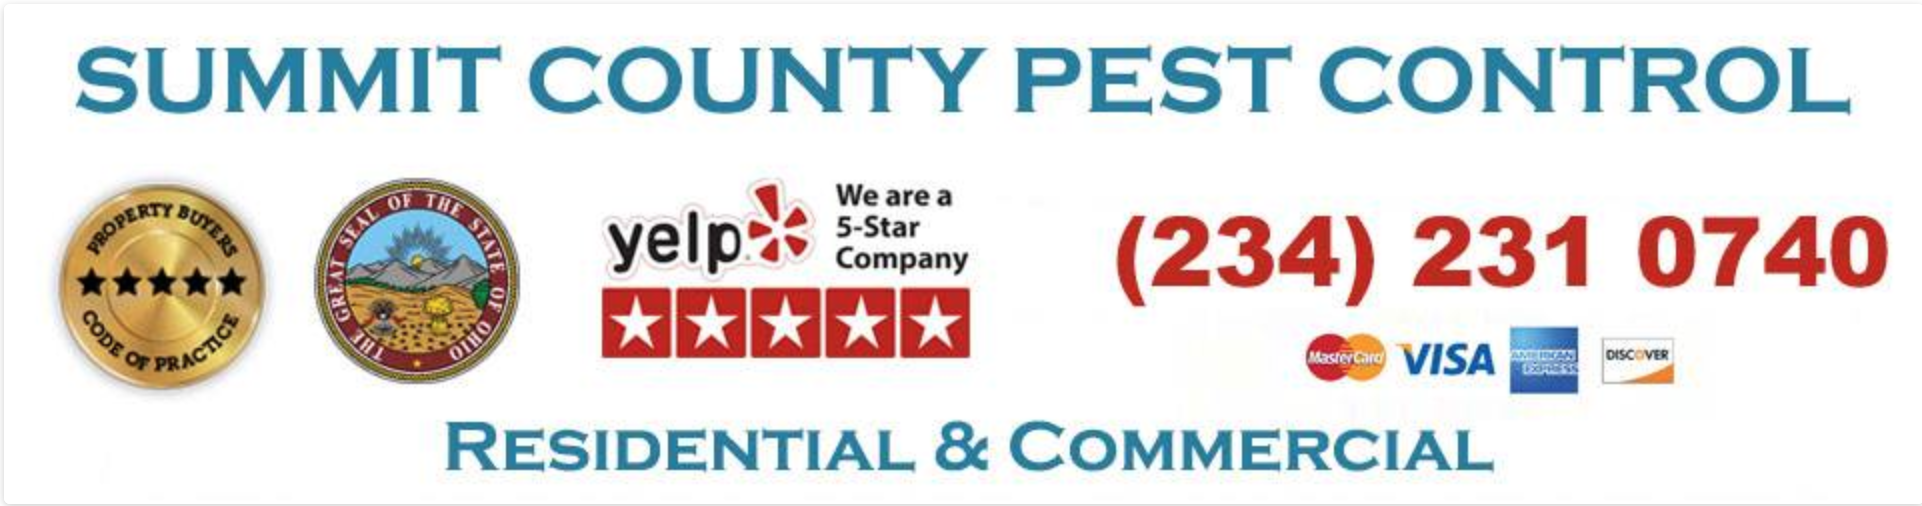 Summit County Pest Control Launches a Website Offering Pest Control Services Across Summit County, Ohio